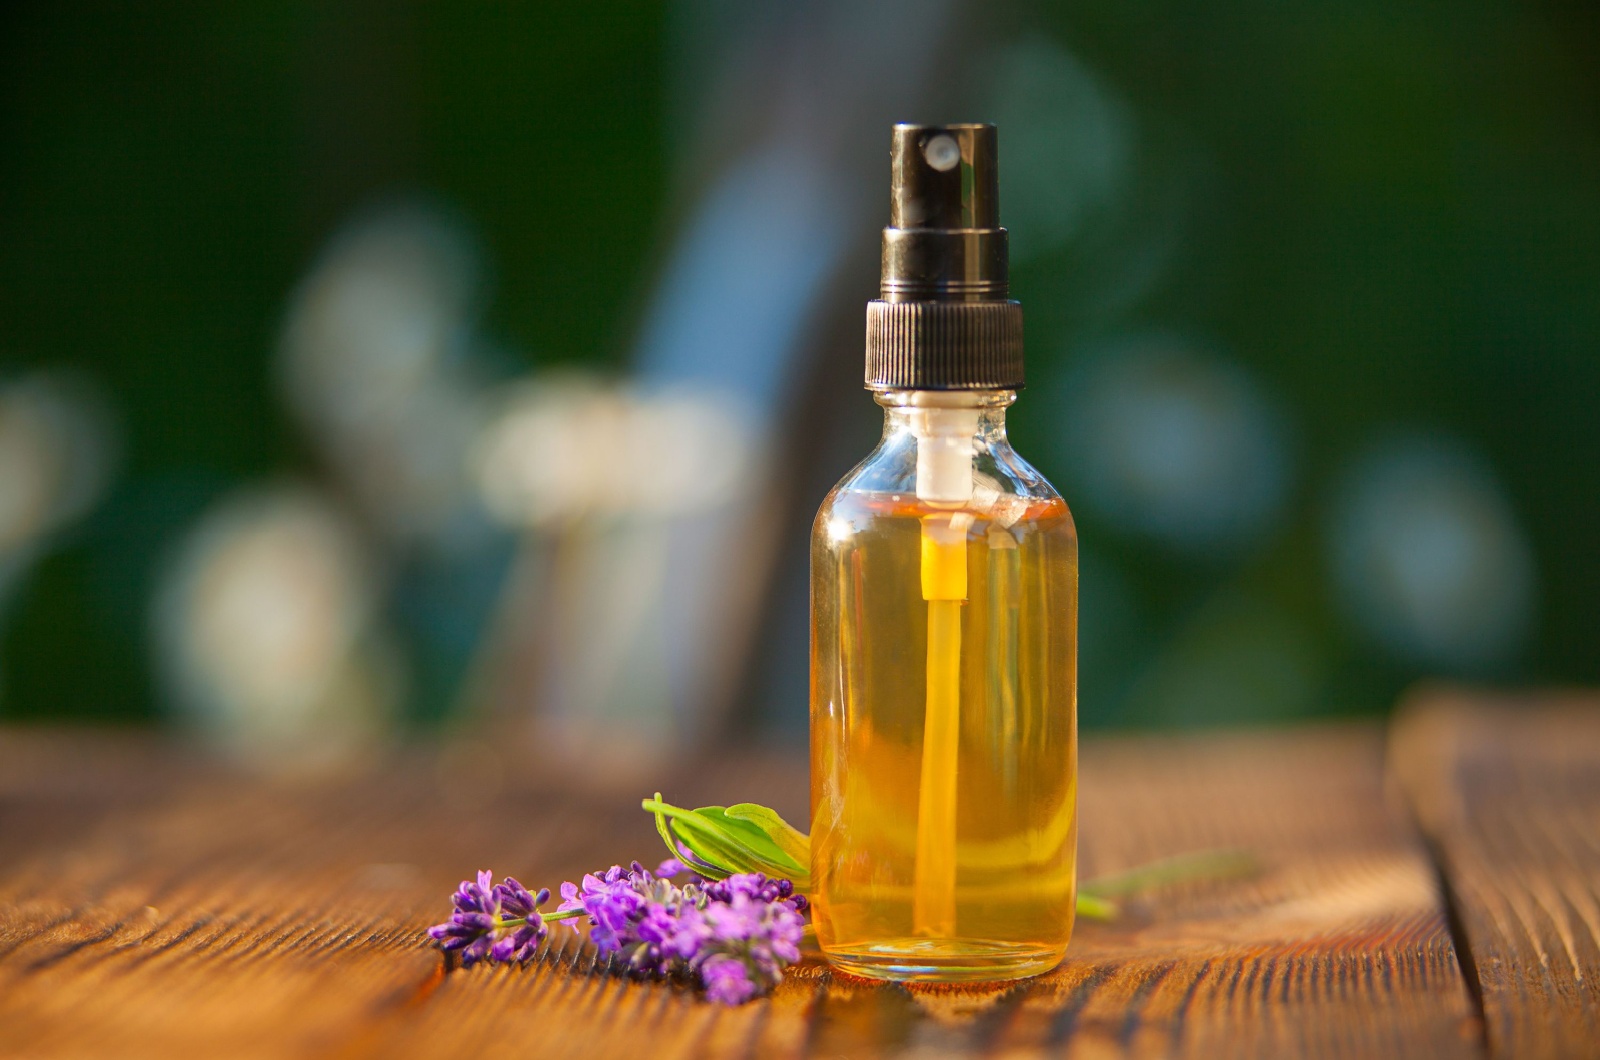 lavender oil in a bottle on the table